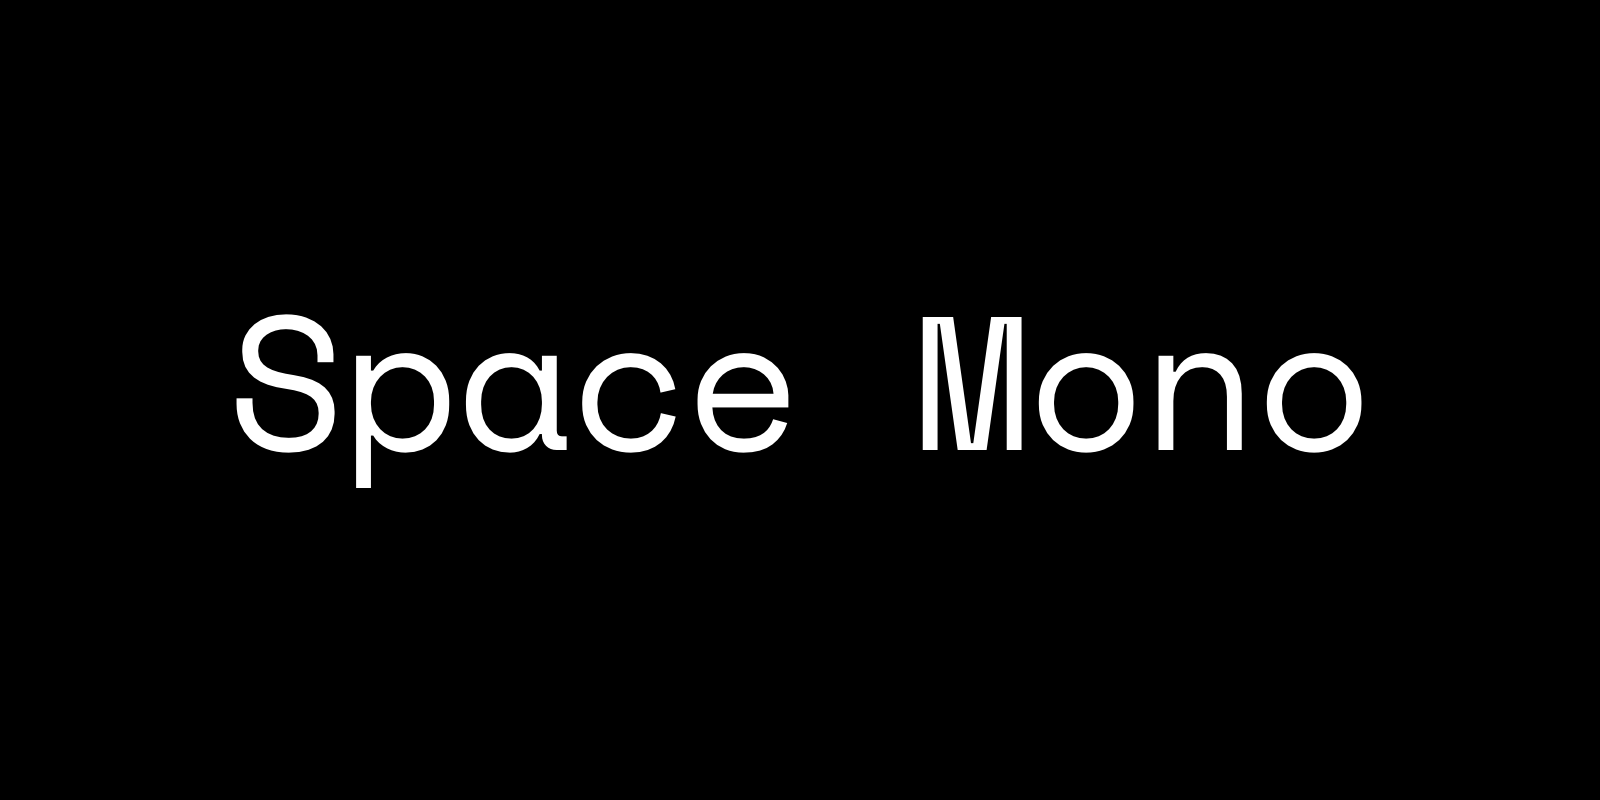 Space Mono by Colophon Foundry